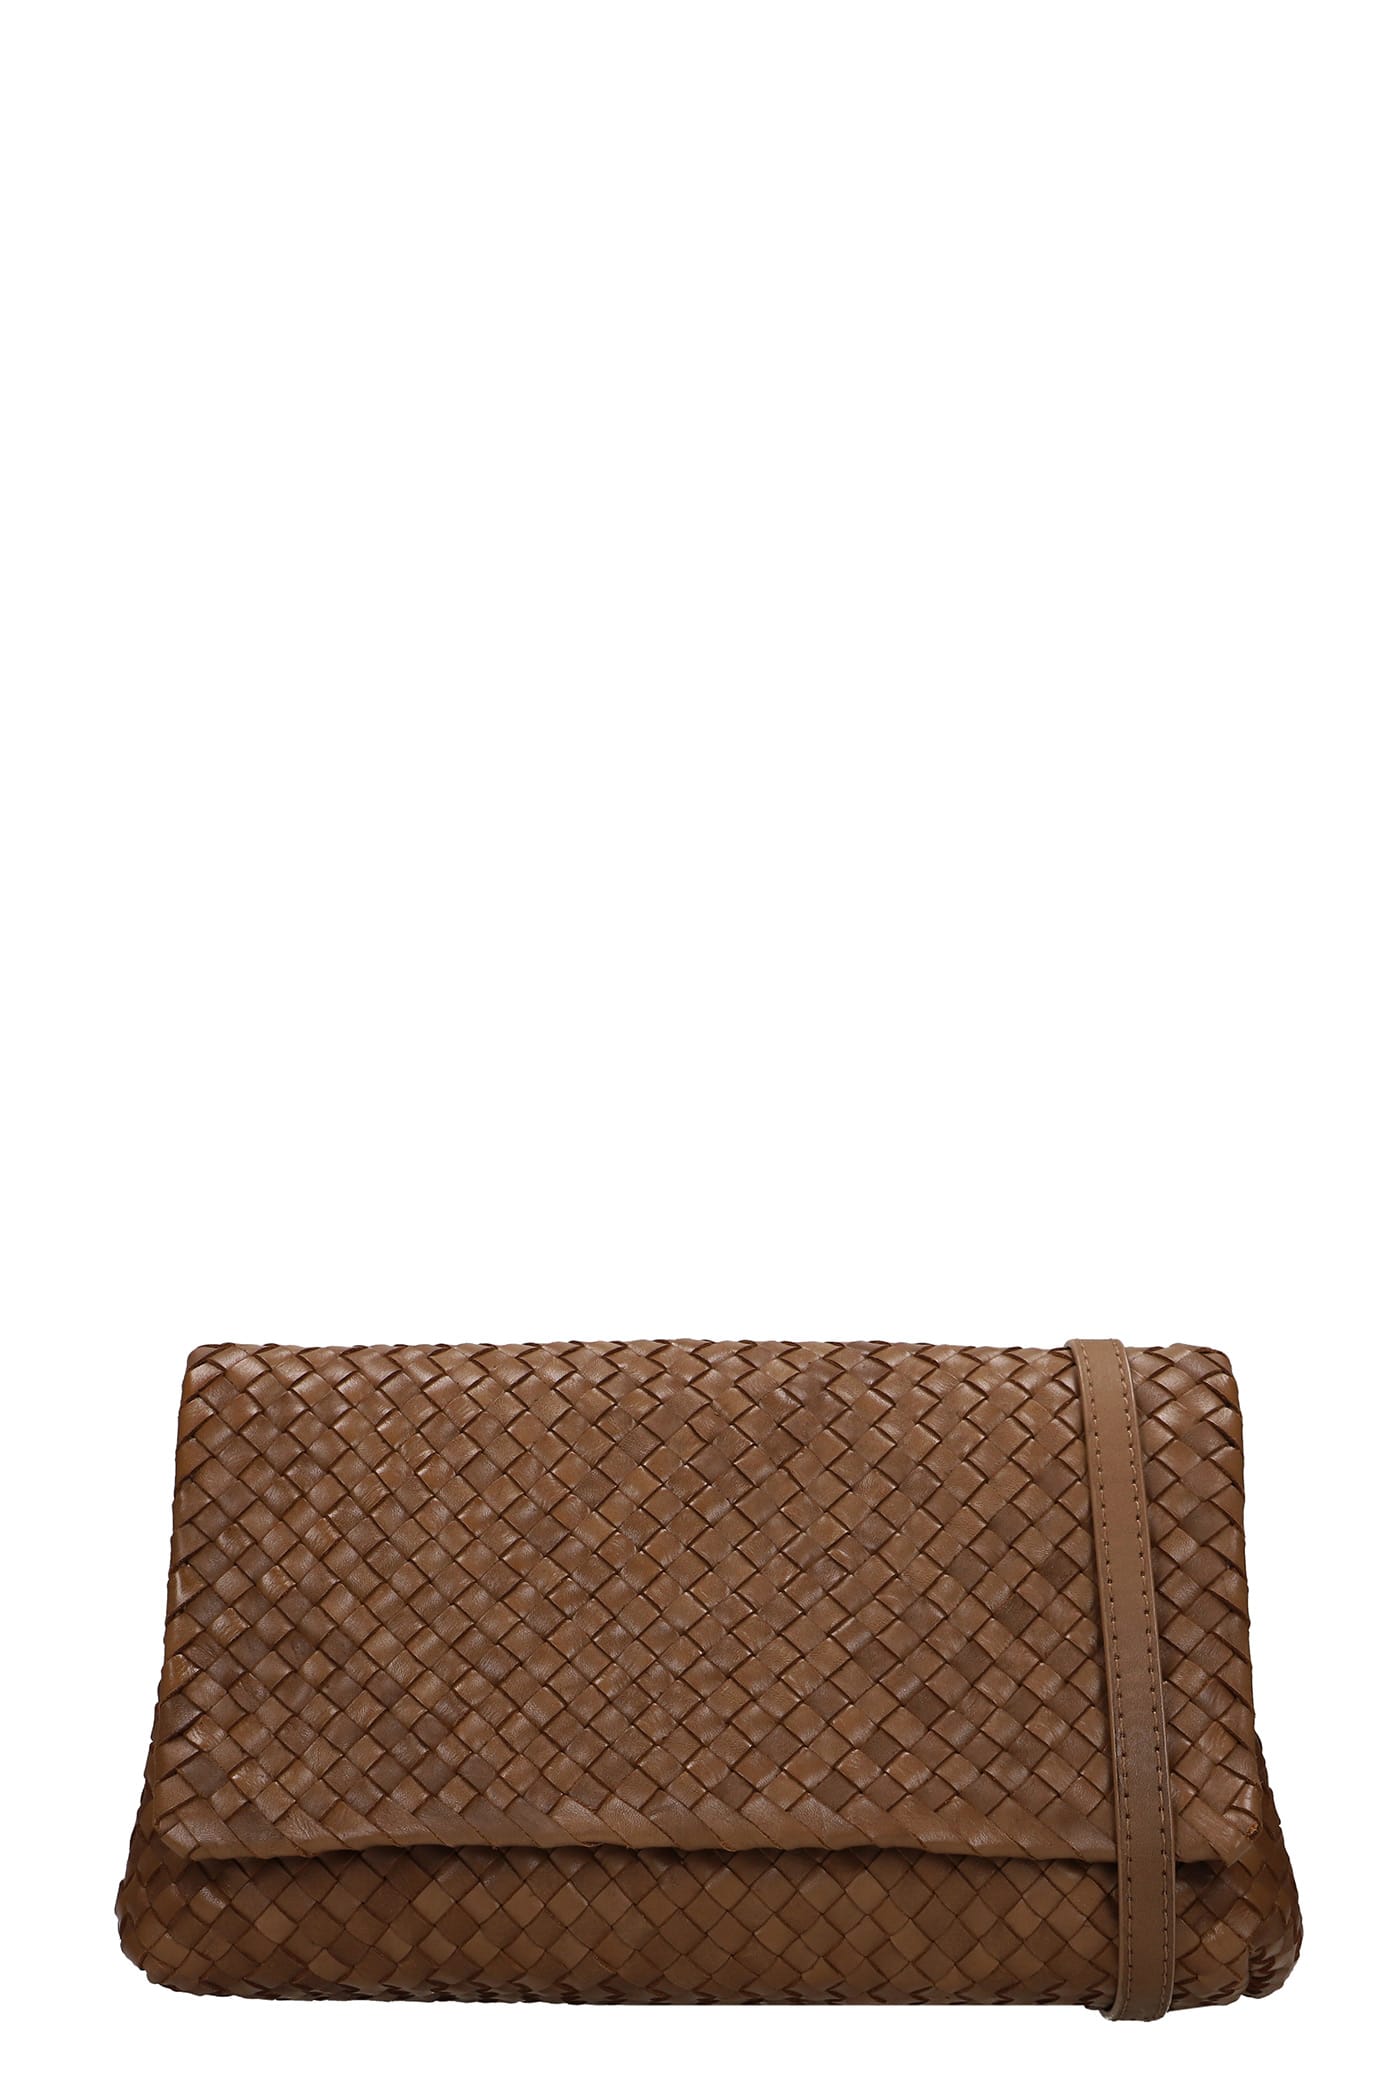 Officine Creative Hand Bag In Brown Leather